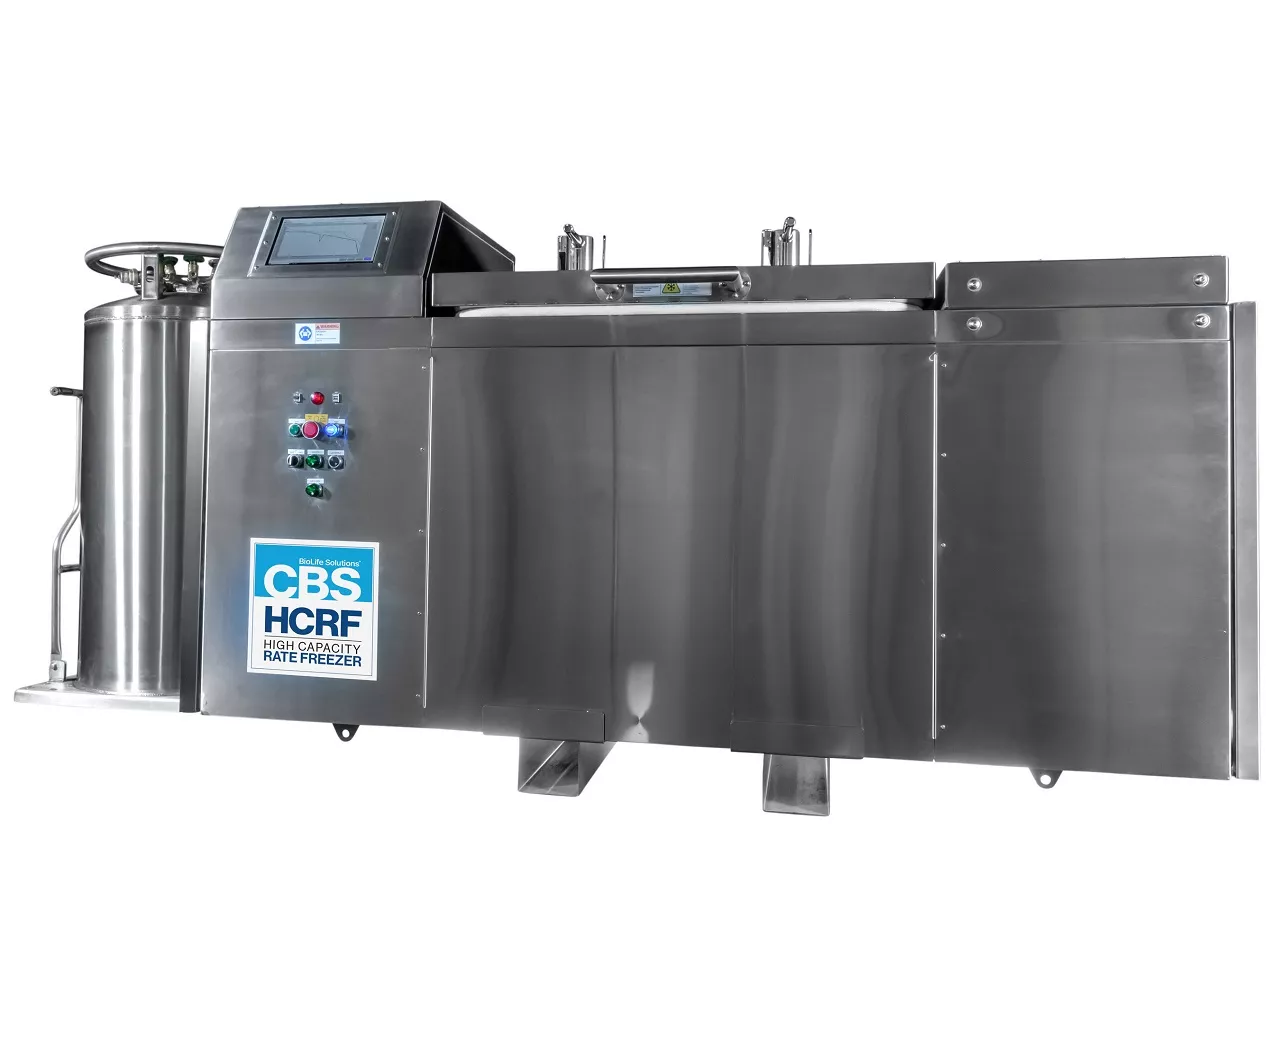 BioLife Solutions Launches New High Capacity Controlled Rate Freezer Line